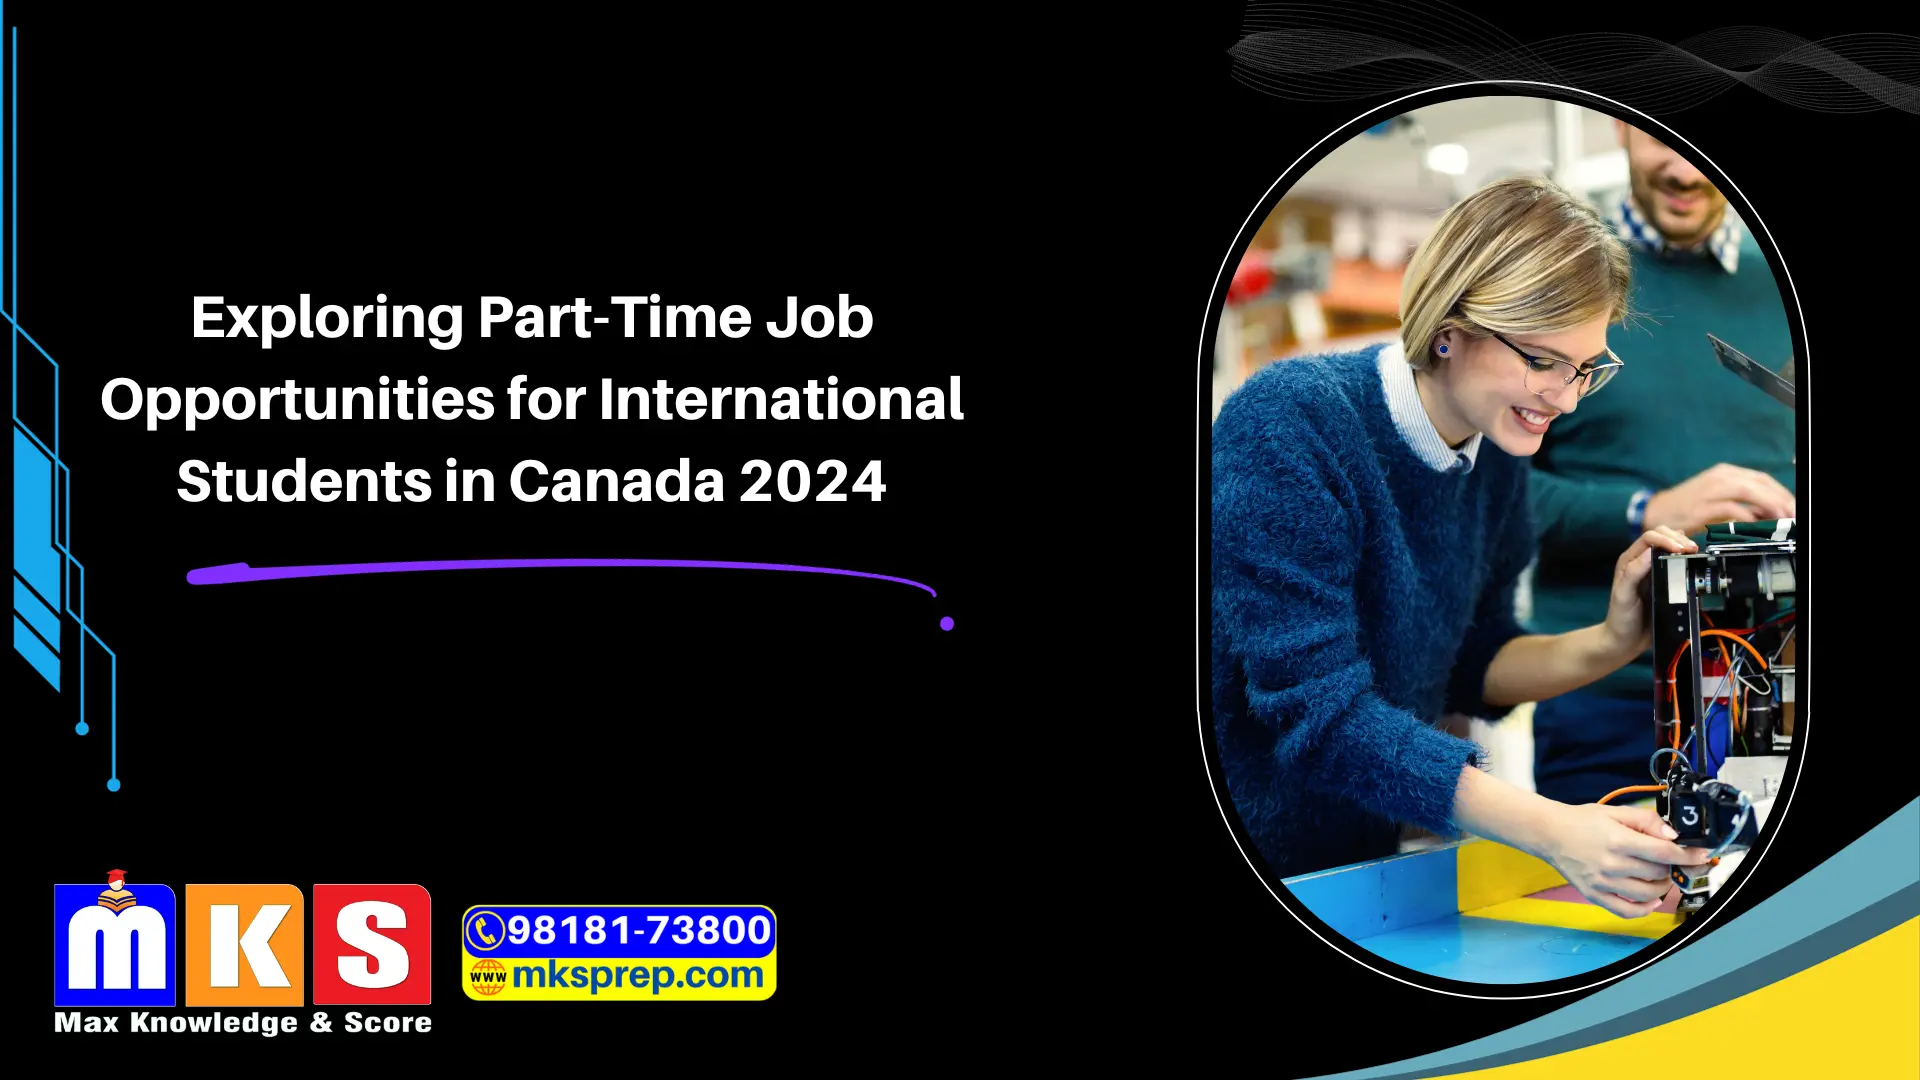 Exploring Part-Time Job Opportunities for International Students in Canada 2024